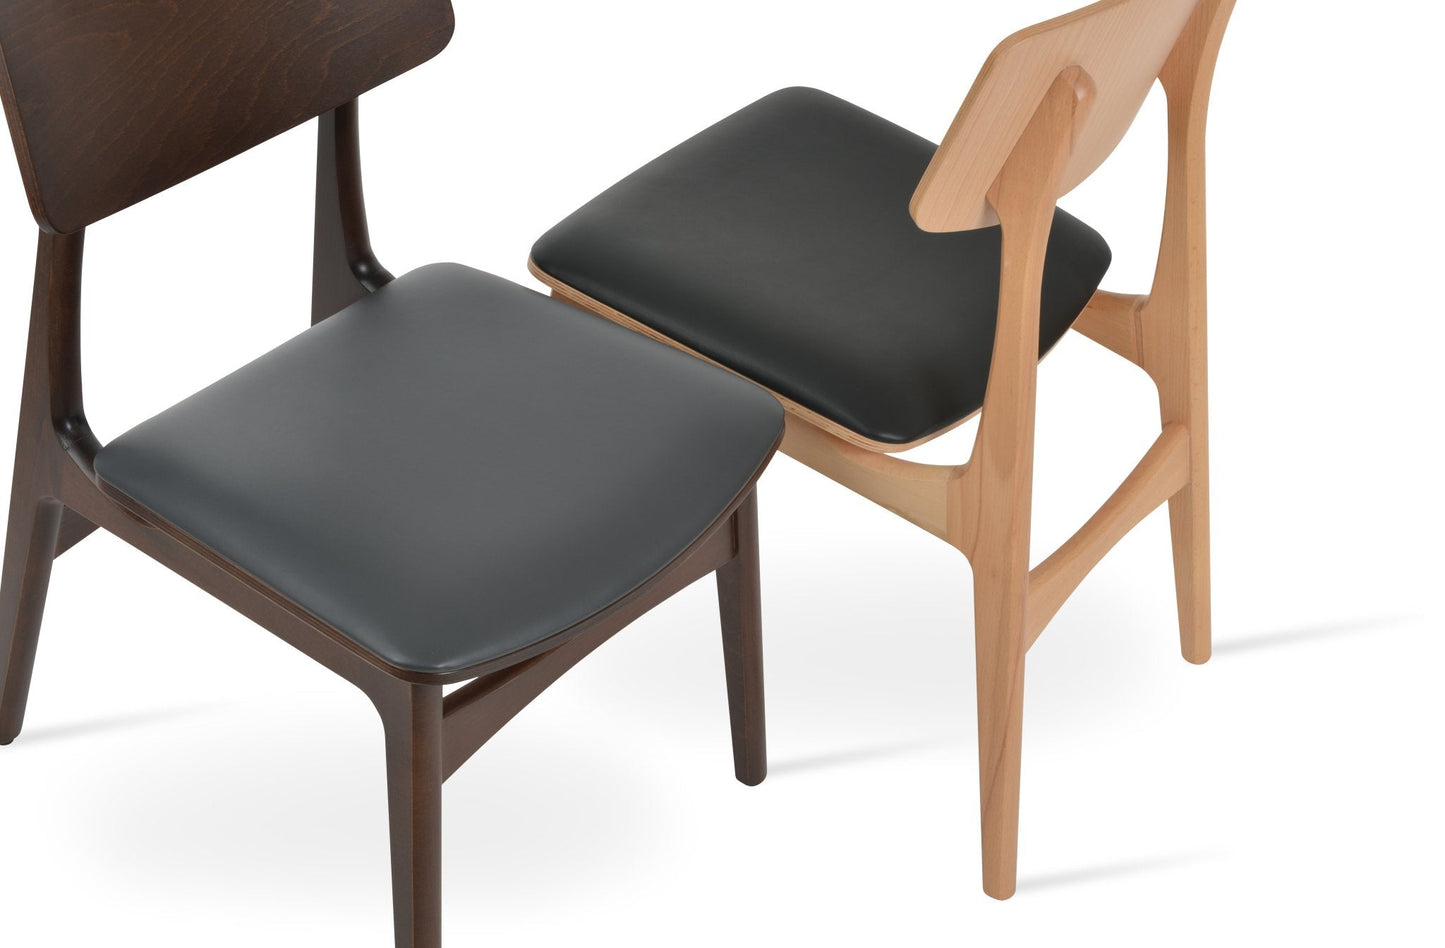 Black Leather and Wood Dining Chairs Bacco - Your Bar Stools Canada